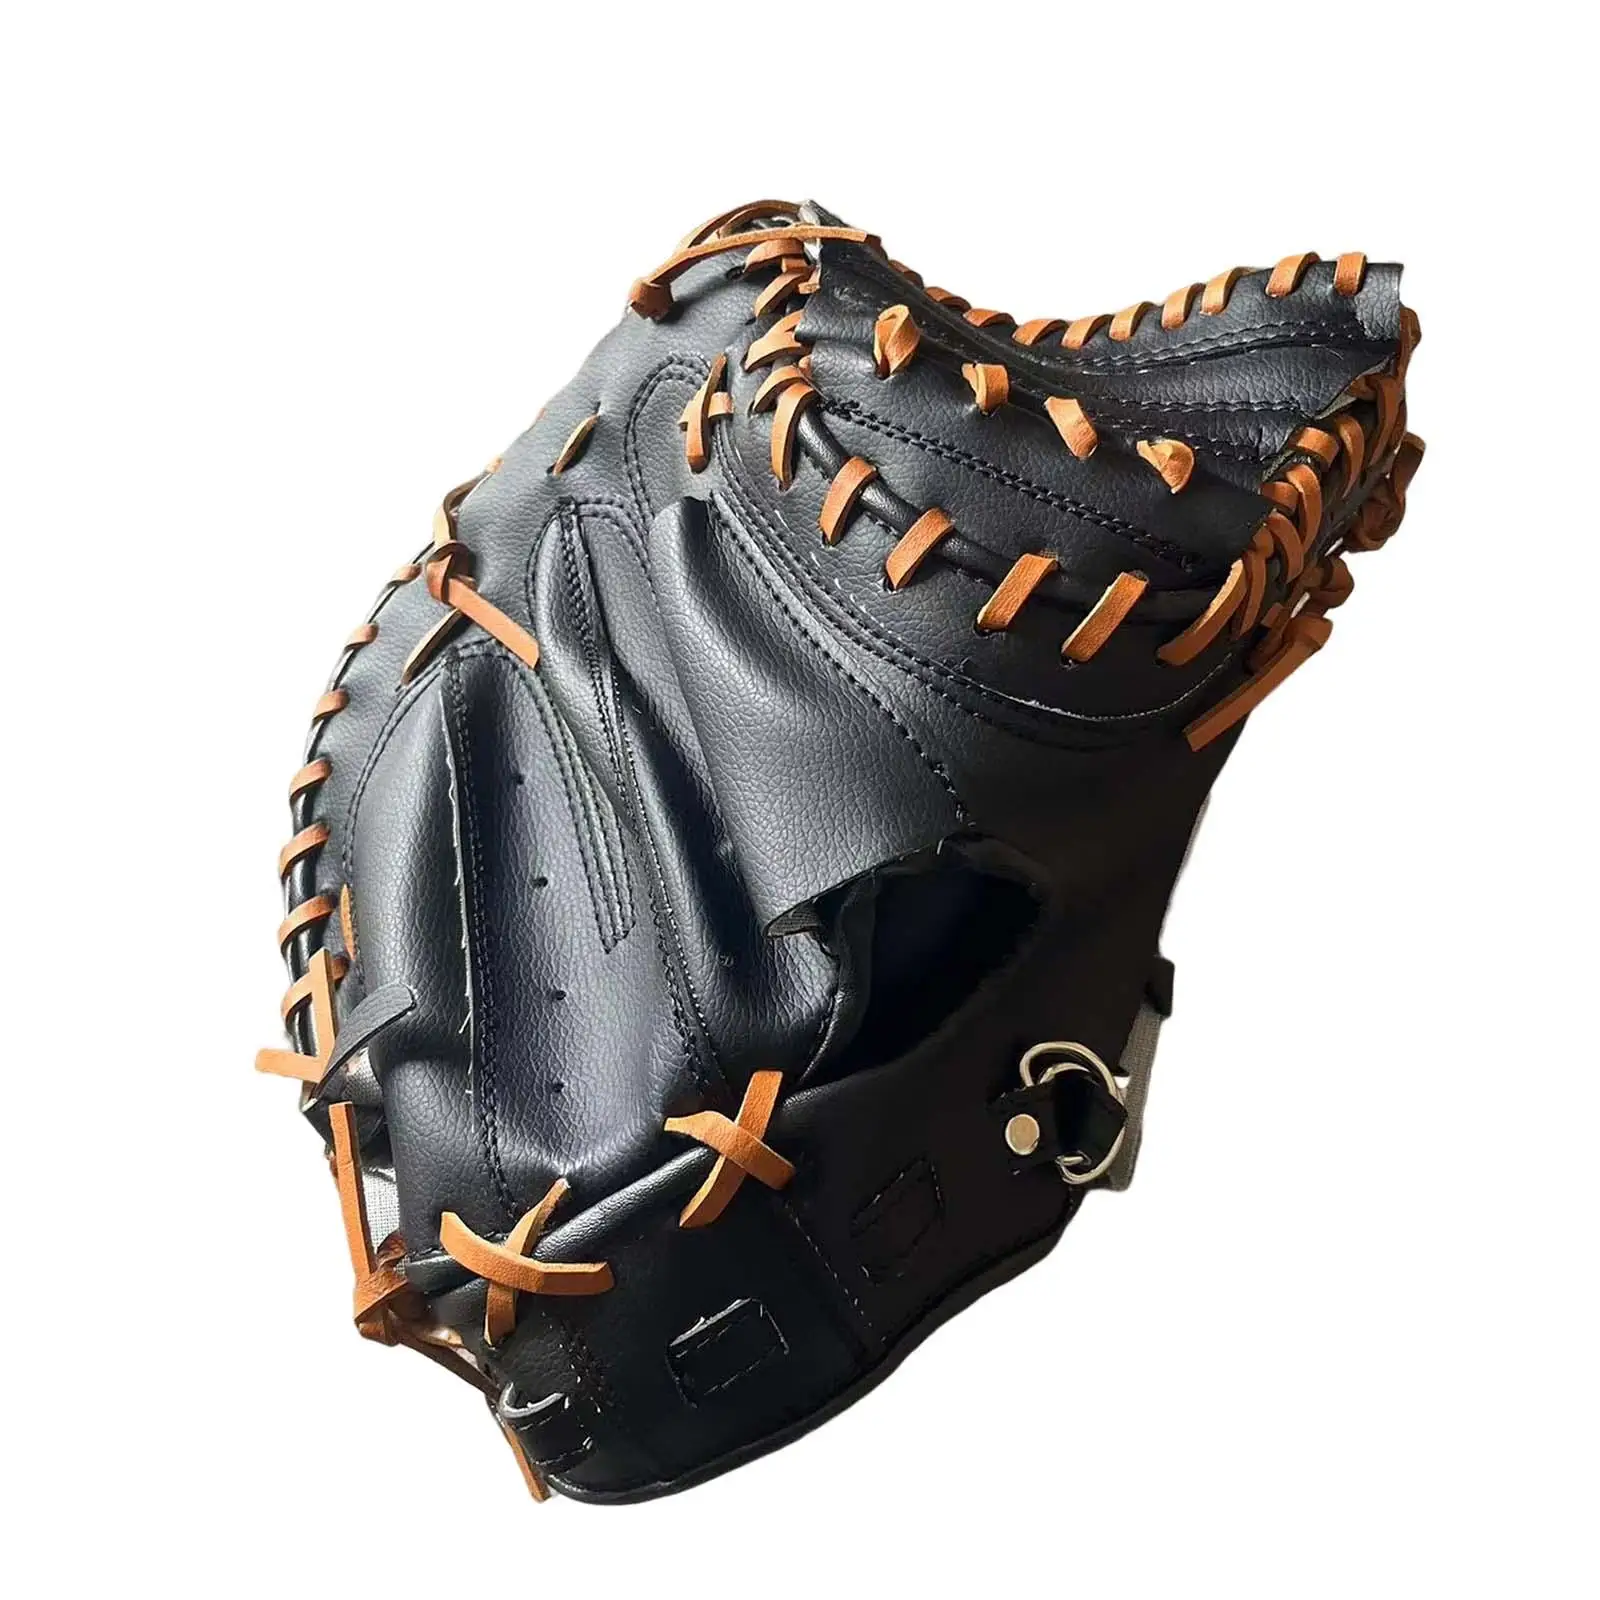 Thickened Baseball Glove Softball Mitt Flexibility Outfield Gloves Left Handed Comfortable PU Catcher Mitts for Training Match